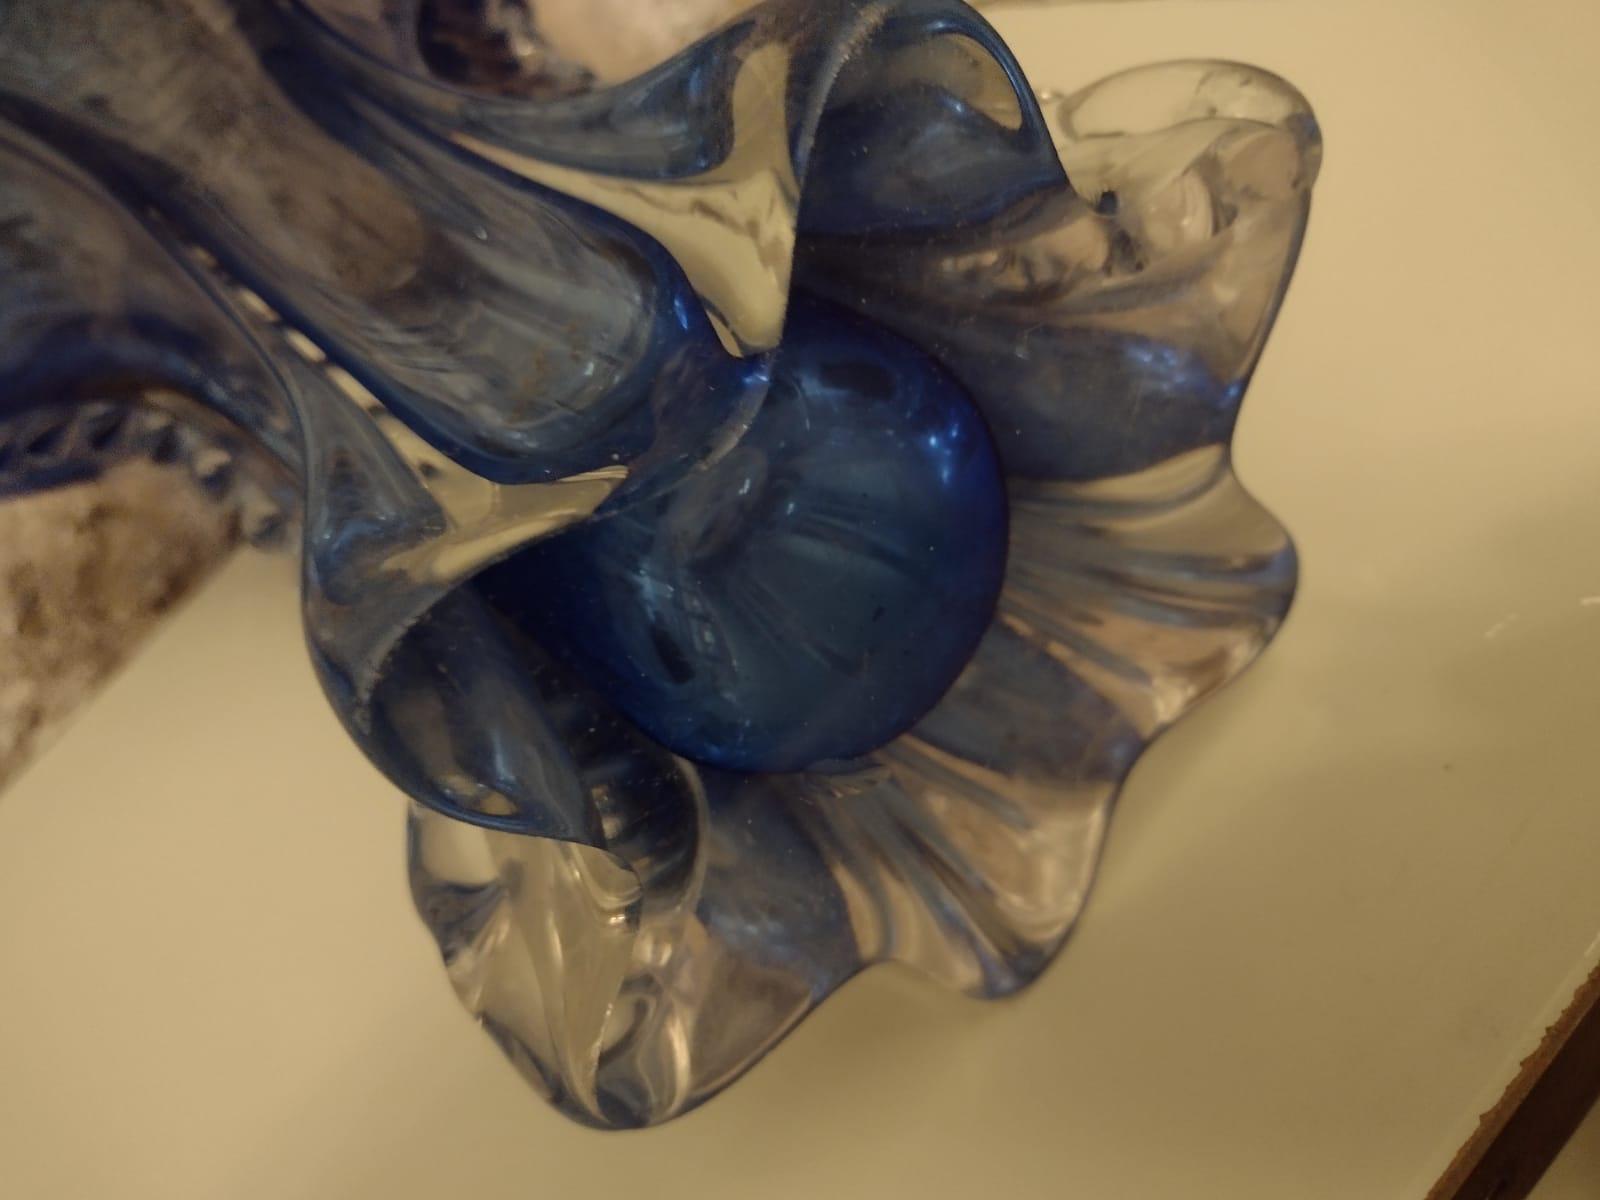 Beutiful mid century Murano glass vase from the renown glass art workshops in Italy. Artfully made in the period around 1950 this fantastic shaped glass vase shows a lovely coloration in a clear glass and deep blue tone. A decorative piece of Murano